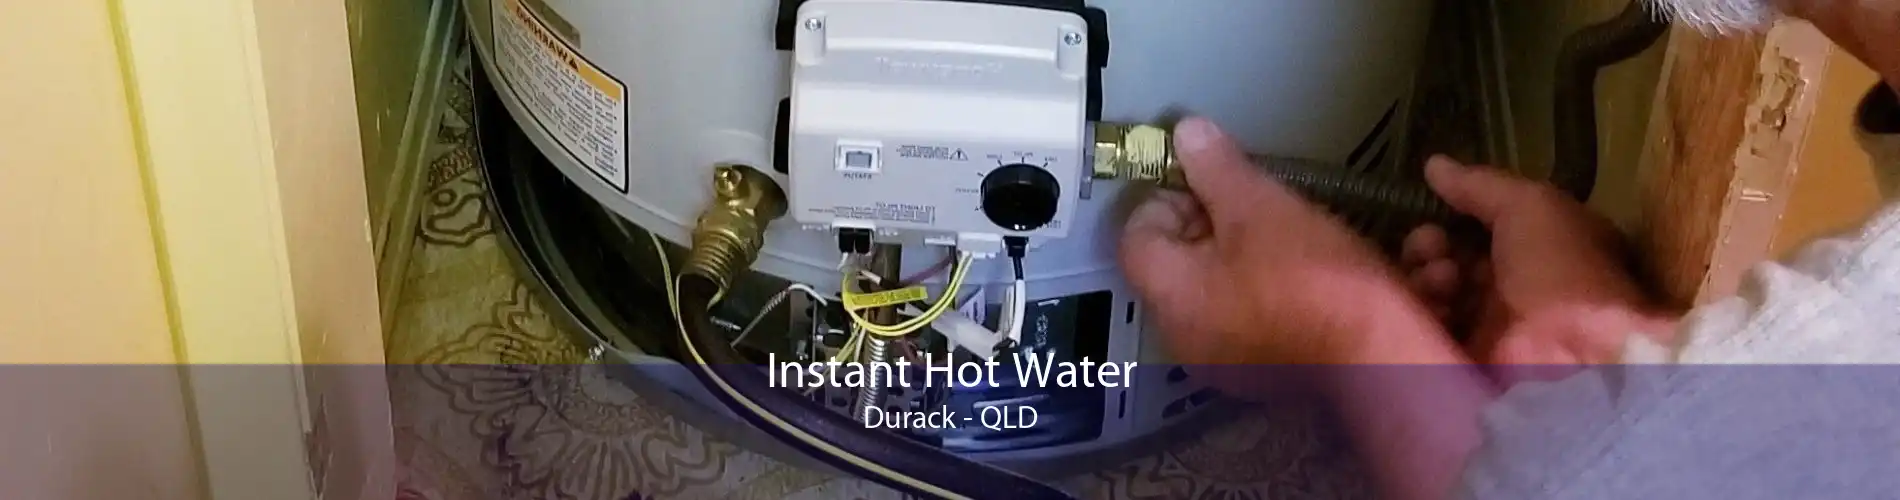 Instant Hot Water Durack - QLD